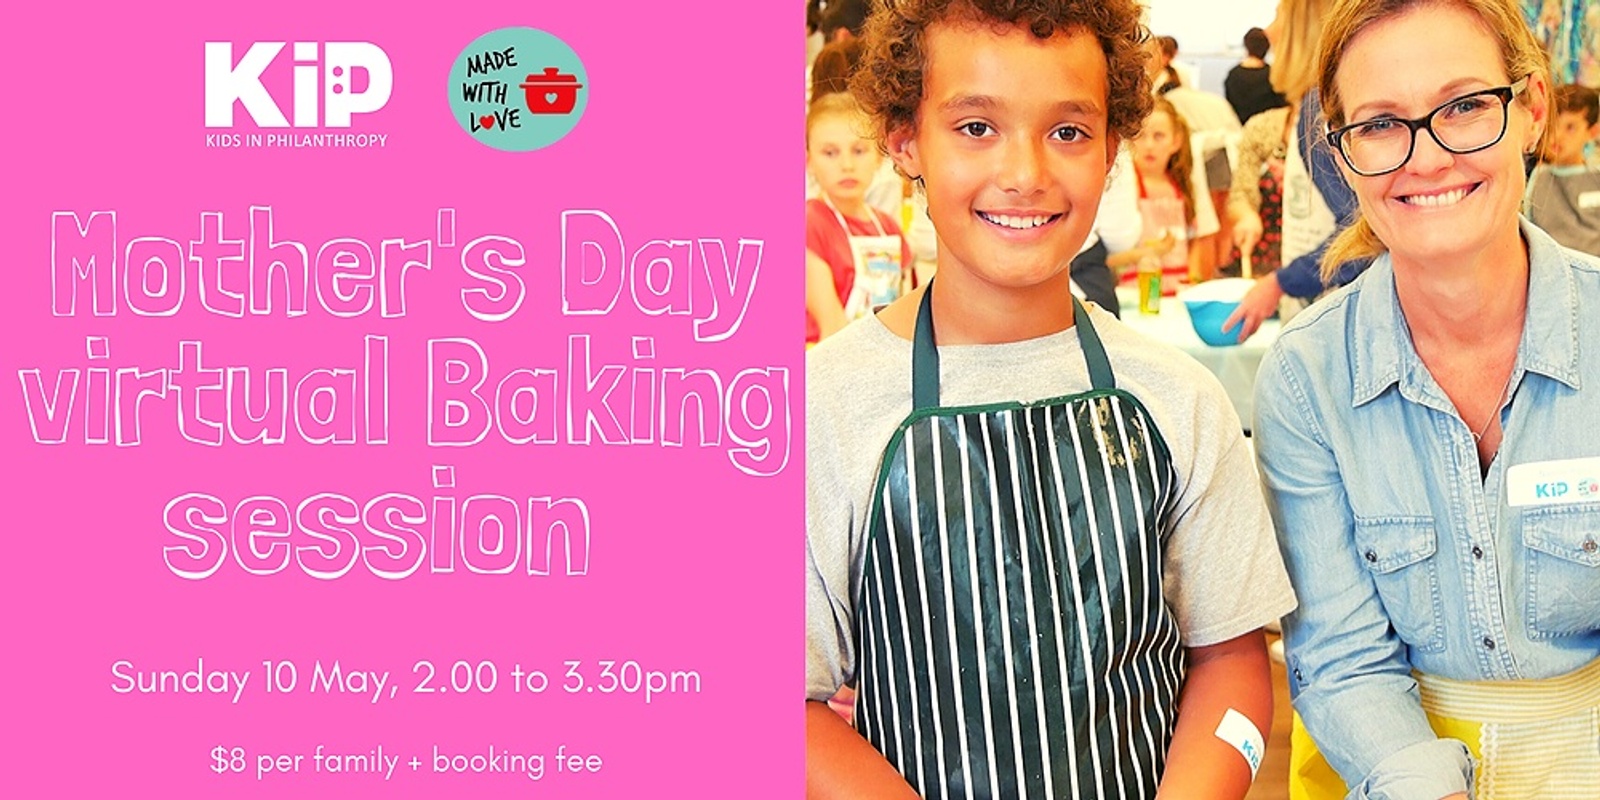 Banner image for KiP Made with Love virtual Baking Session